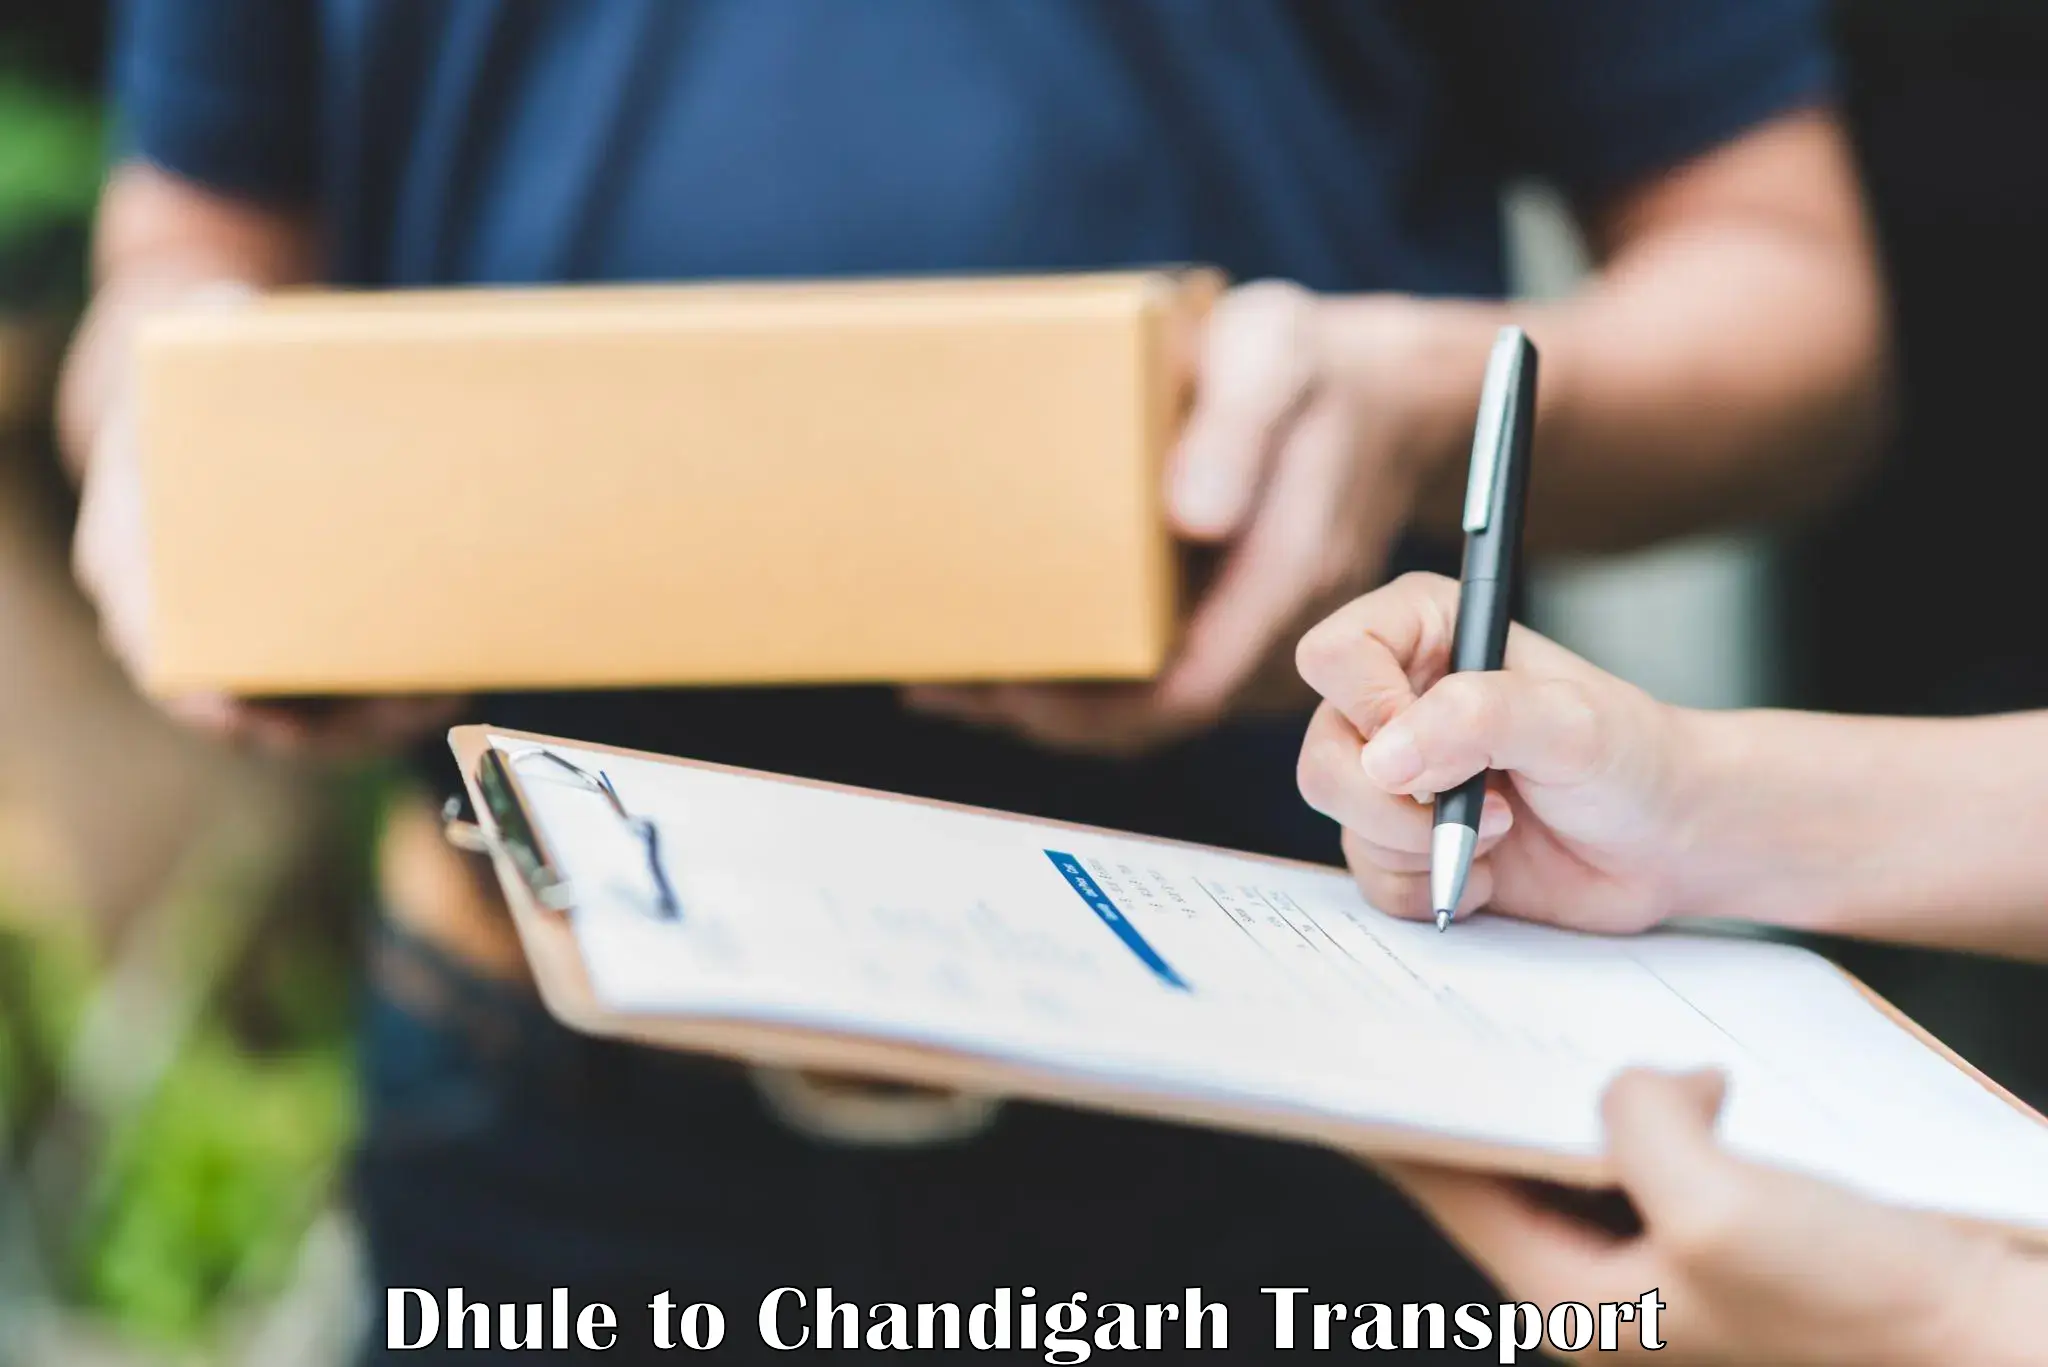 Commercial transport service Dhule to Chandigarh